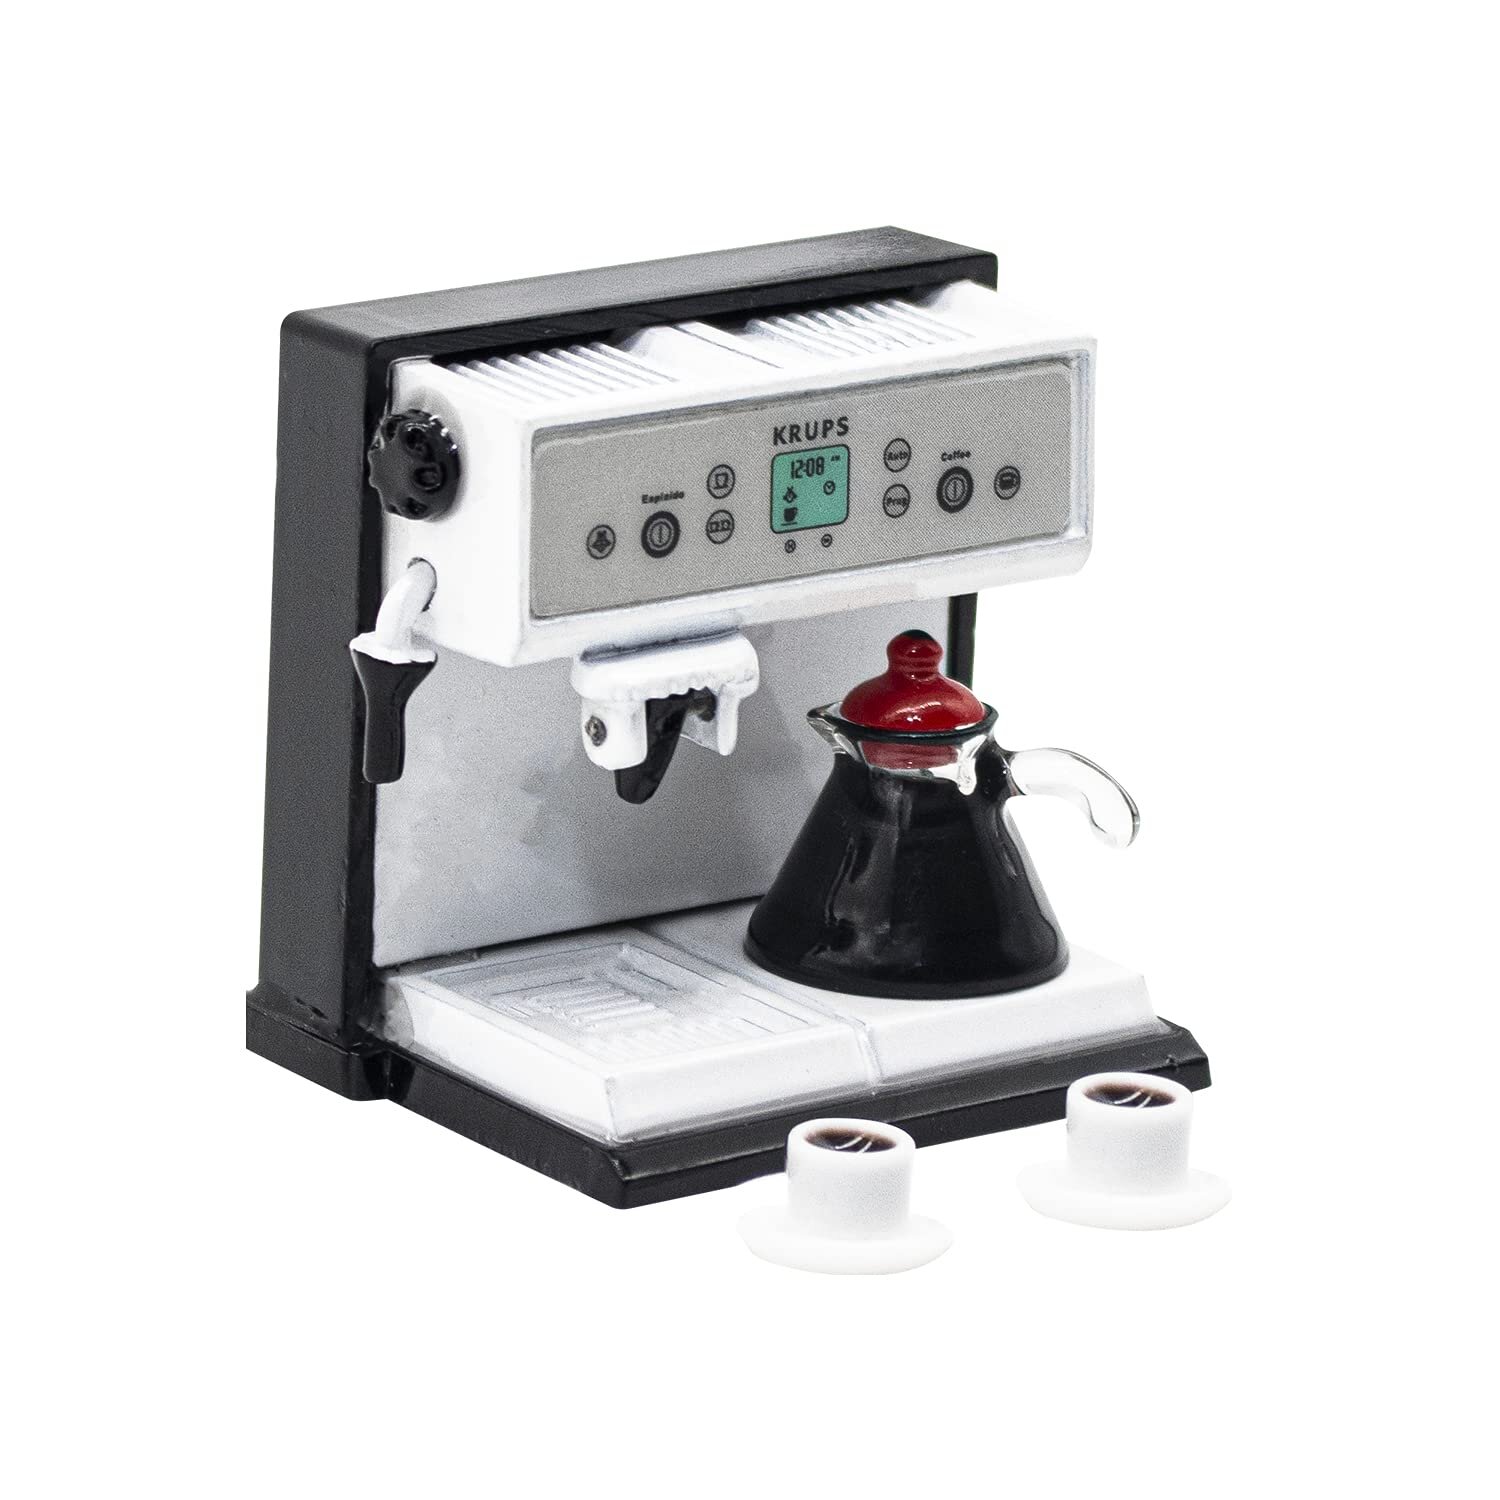 Hiawbon 1:12 Scale Miniature coffee Maker Machine with Pot and 2 cups Set for Mini House DIY Pub Kitchen Bar Decoration